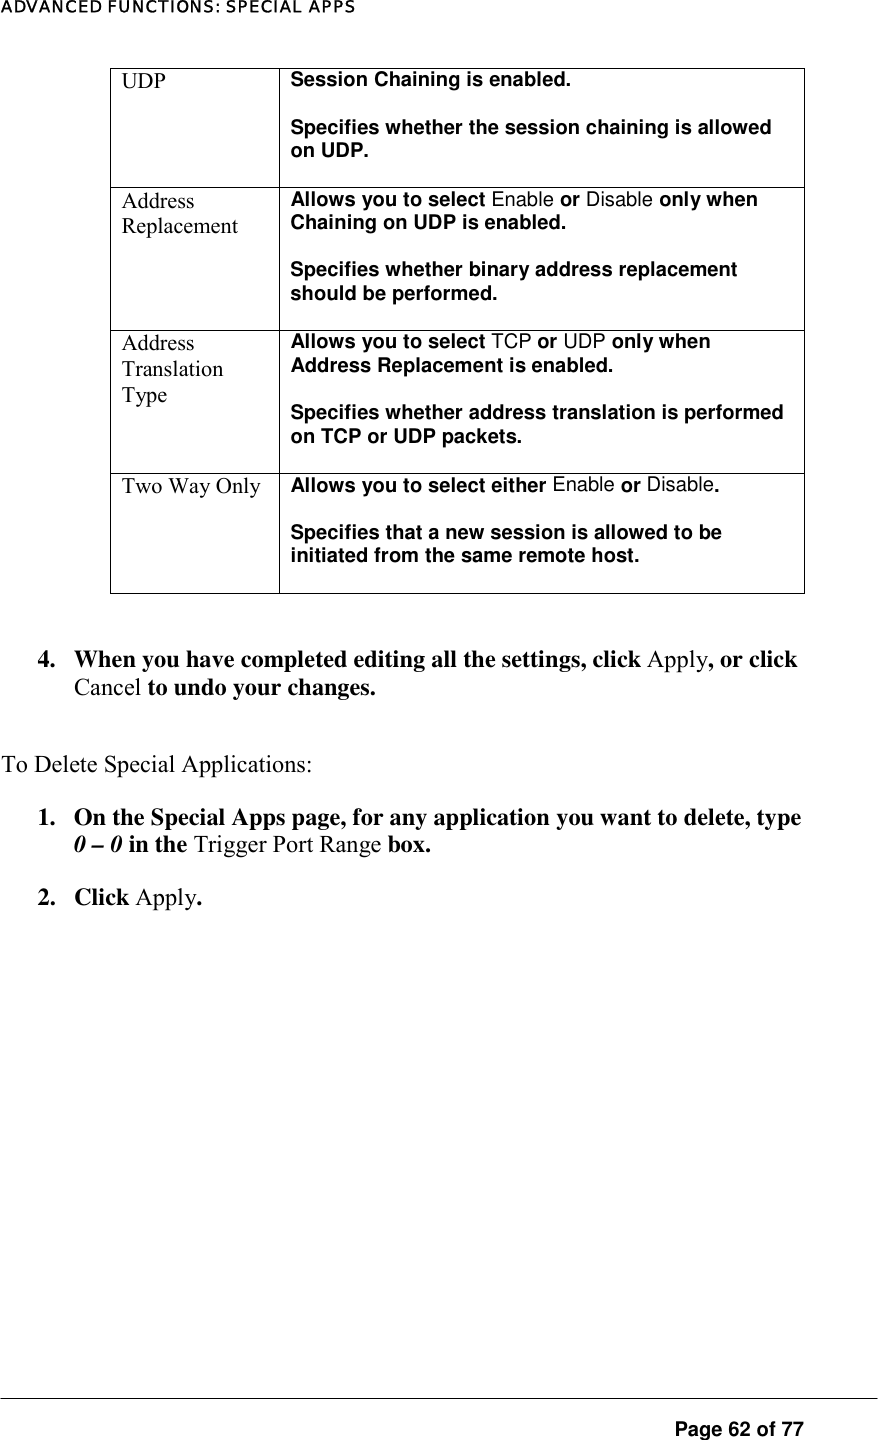 ADVANCED FUNCTIONS: SPECIAL APPS  Page 62 of 77 UDP  Session Chaining is enabled.  Specifies whether the session chaining is allowed on UDP.  Address Replacement Allows you to select Enable or Disable only when Chaining on UDP is enabled.  Specifies whether binary address replacement should be performed.  Address Translation Type Allows you to select TCP or UDP only when Address Replacement is enabled. Specifies whether address translation is performed on TCP or UDP packets.  Two Way Only  Allows you to select either Enable or Disable.  Specifies that a new session is allowed to be initiated from the same remote host.   4.  When you have completed editing all the settings, click Apply, or click Cancel to undo your changes.  To Delete Special Applications:  1.  On the Special Apps page, for any application you want to delete, type 0 – 0 in the Trigger Port Range box.  2. Click Apply. 